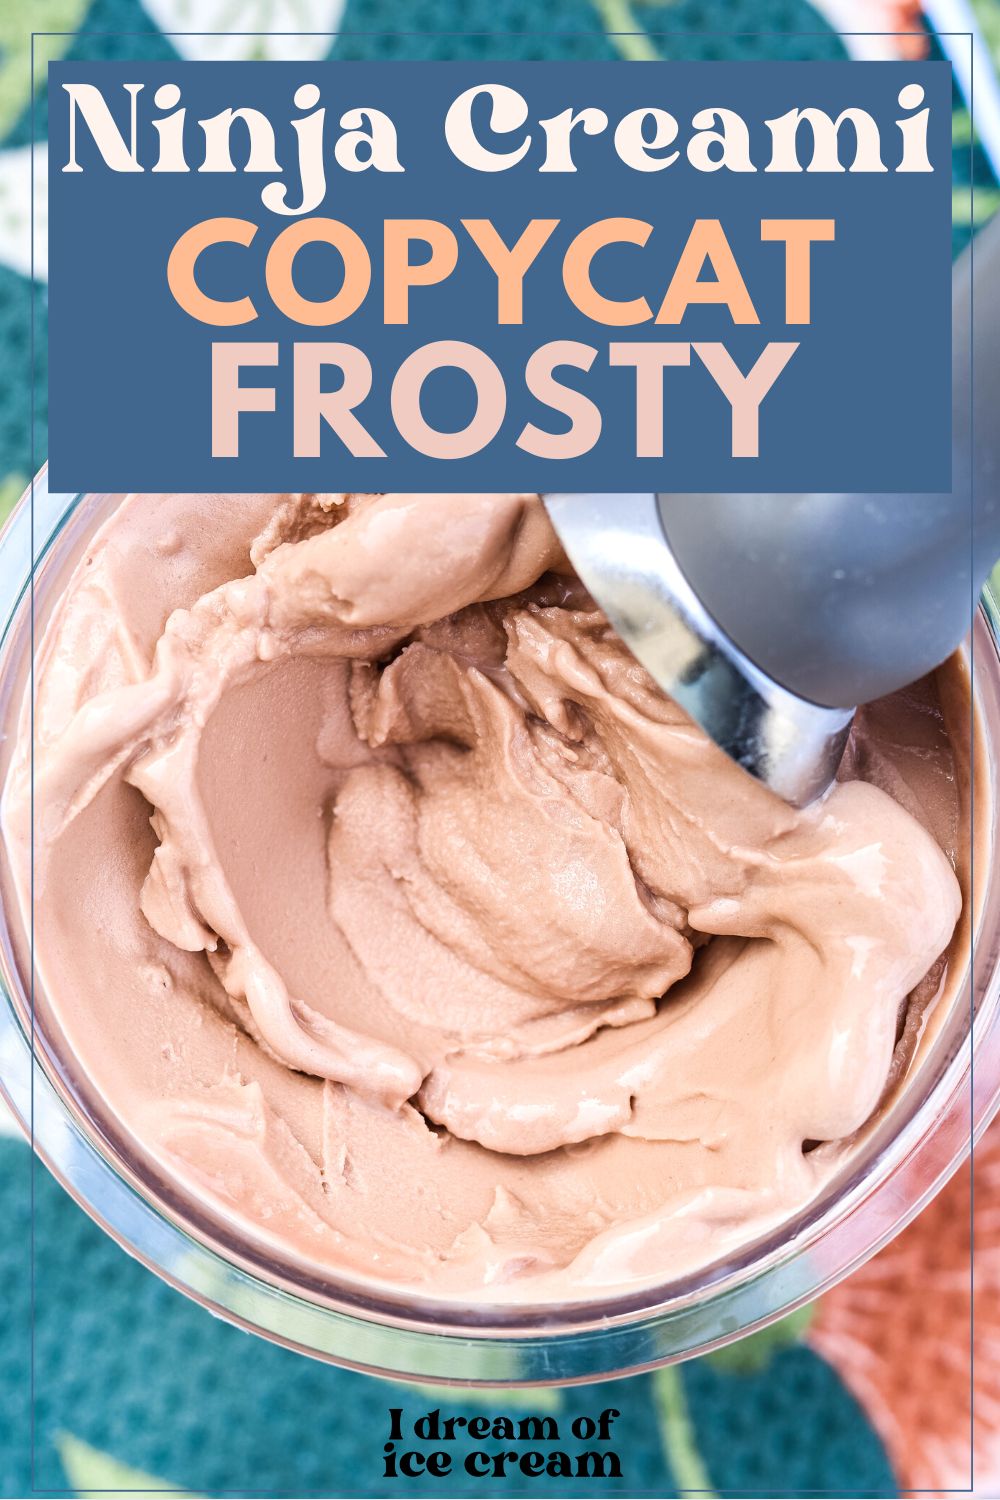 overhead view of a Ninja Creami pint container filled with copycat Frosty dessert.